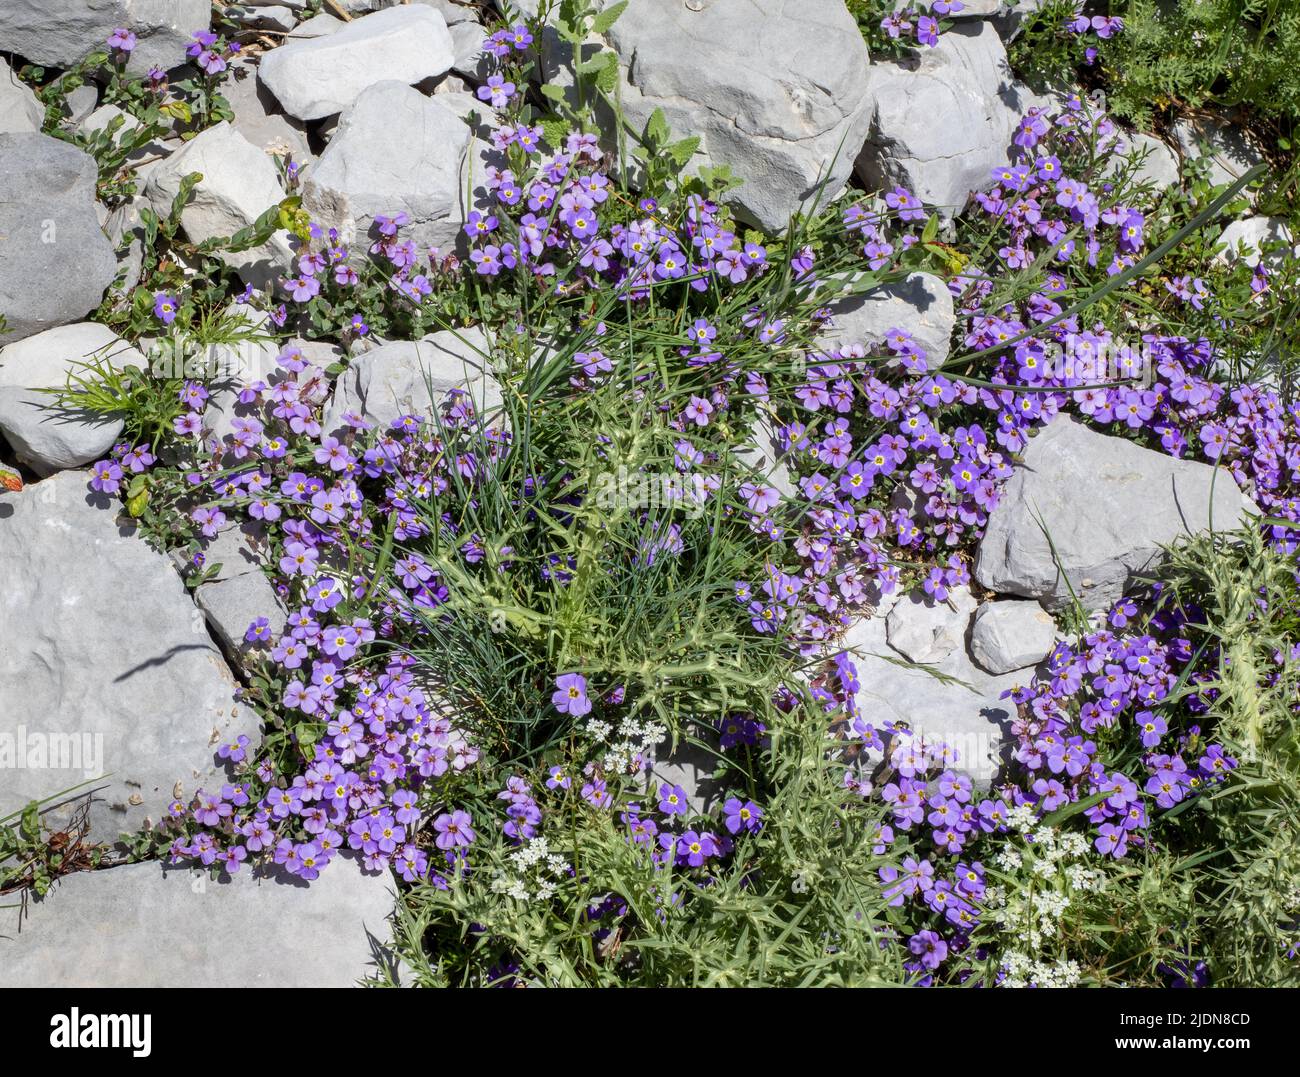 Species of Malcolmia growing amongst karst limestone rubble at 1800m in the Pindus Mountains of Greece on Mount Timfi Stock Photo